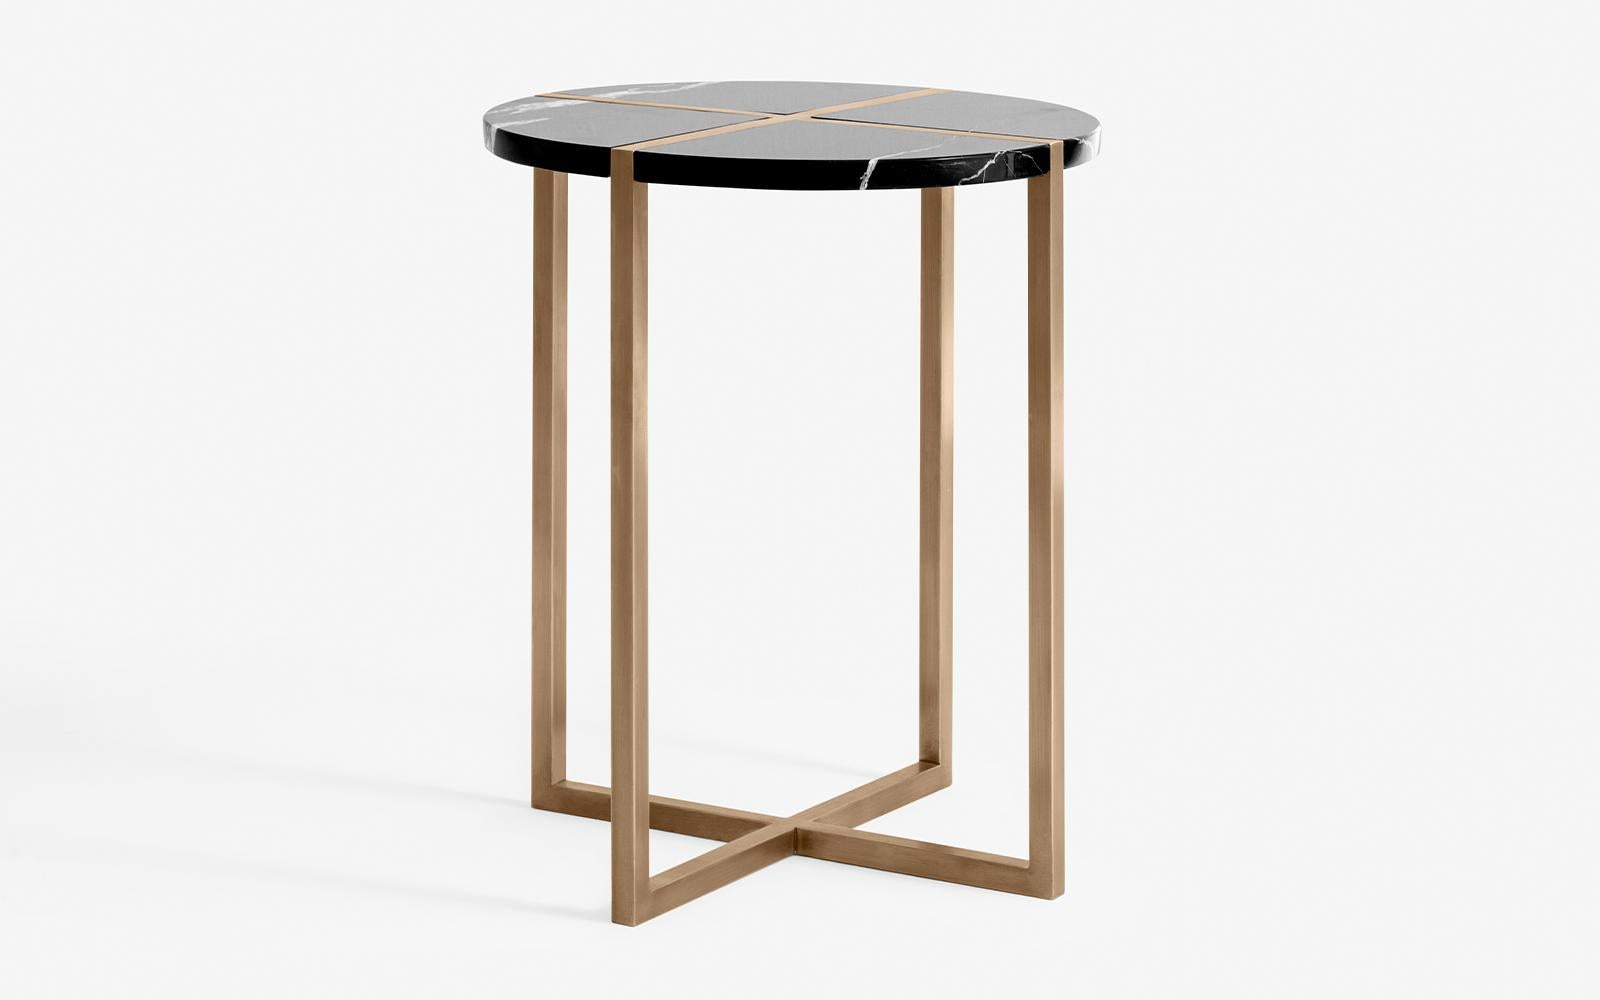 The Famed side table designed as a flawless intersection of marble and brass...

Measures: diameter: 17.7'' / height: 21.3'' (diameter 45 cm / height: 54 cm)
Weight: 11.8 kg

-Alexander black marble
-Brass plated metal
-Registered design